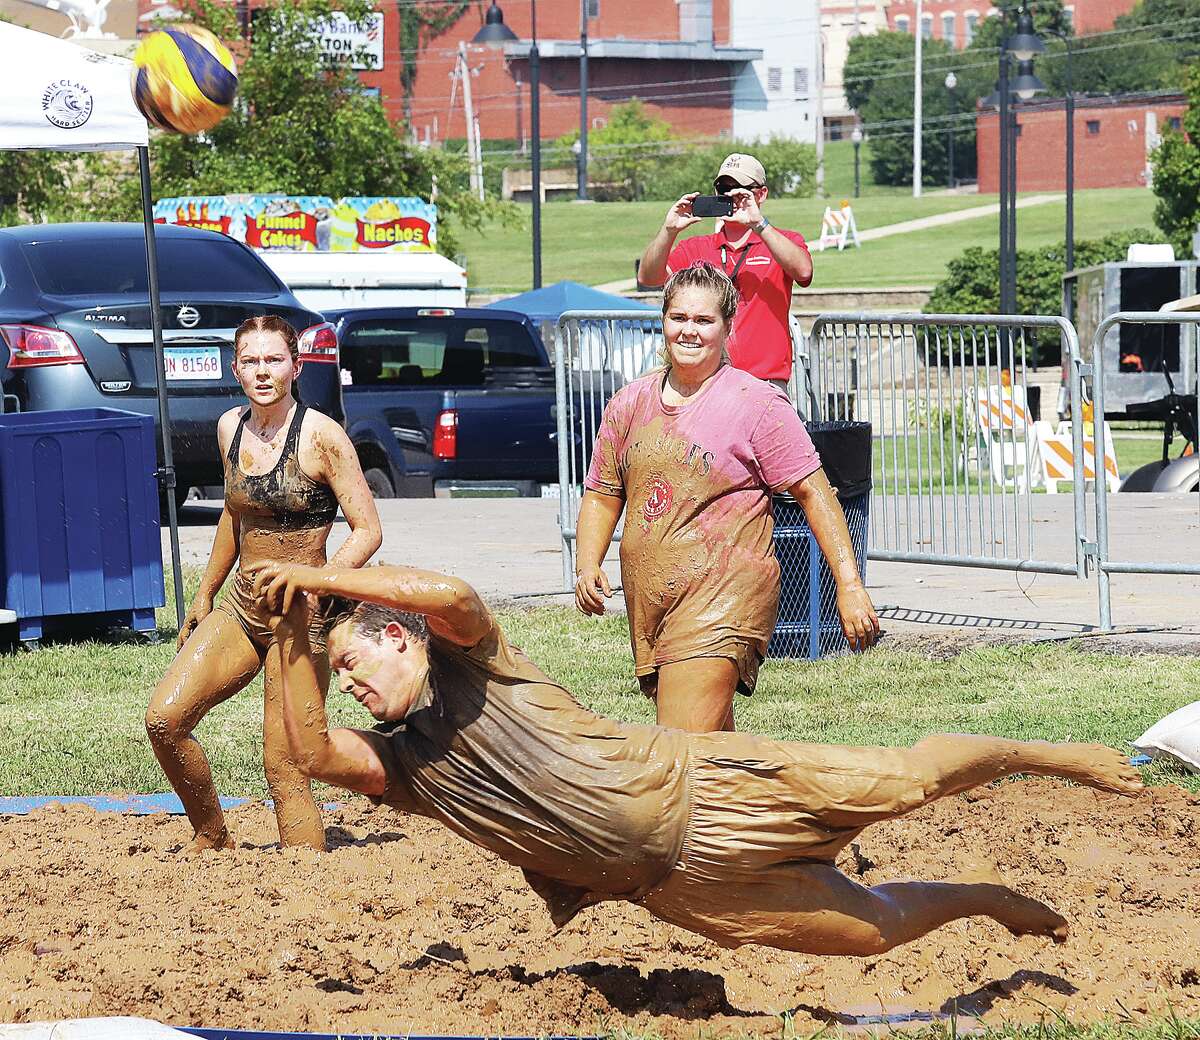 John Badman|The Telegraph Brandon Torrez, from the Ace Holes team, dives for the volleyball Saturday on the first day of the mud volleyball tournament at the Alton Expo. The location of the mud pits was moved closer to the Alton Marina this year and the mud was going through a break in phase with some of it super thick at the start of play. Everybody seemed to enjoy the games which went on most of Saturday. The tournament, sponsored by the Alton Sports Tap, continued Sunday.